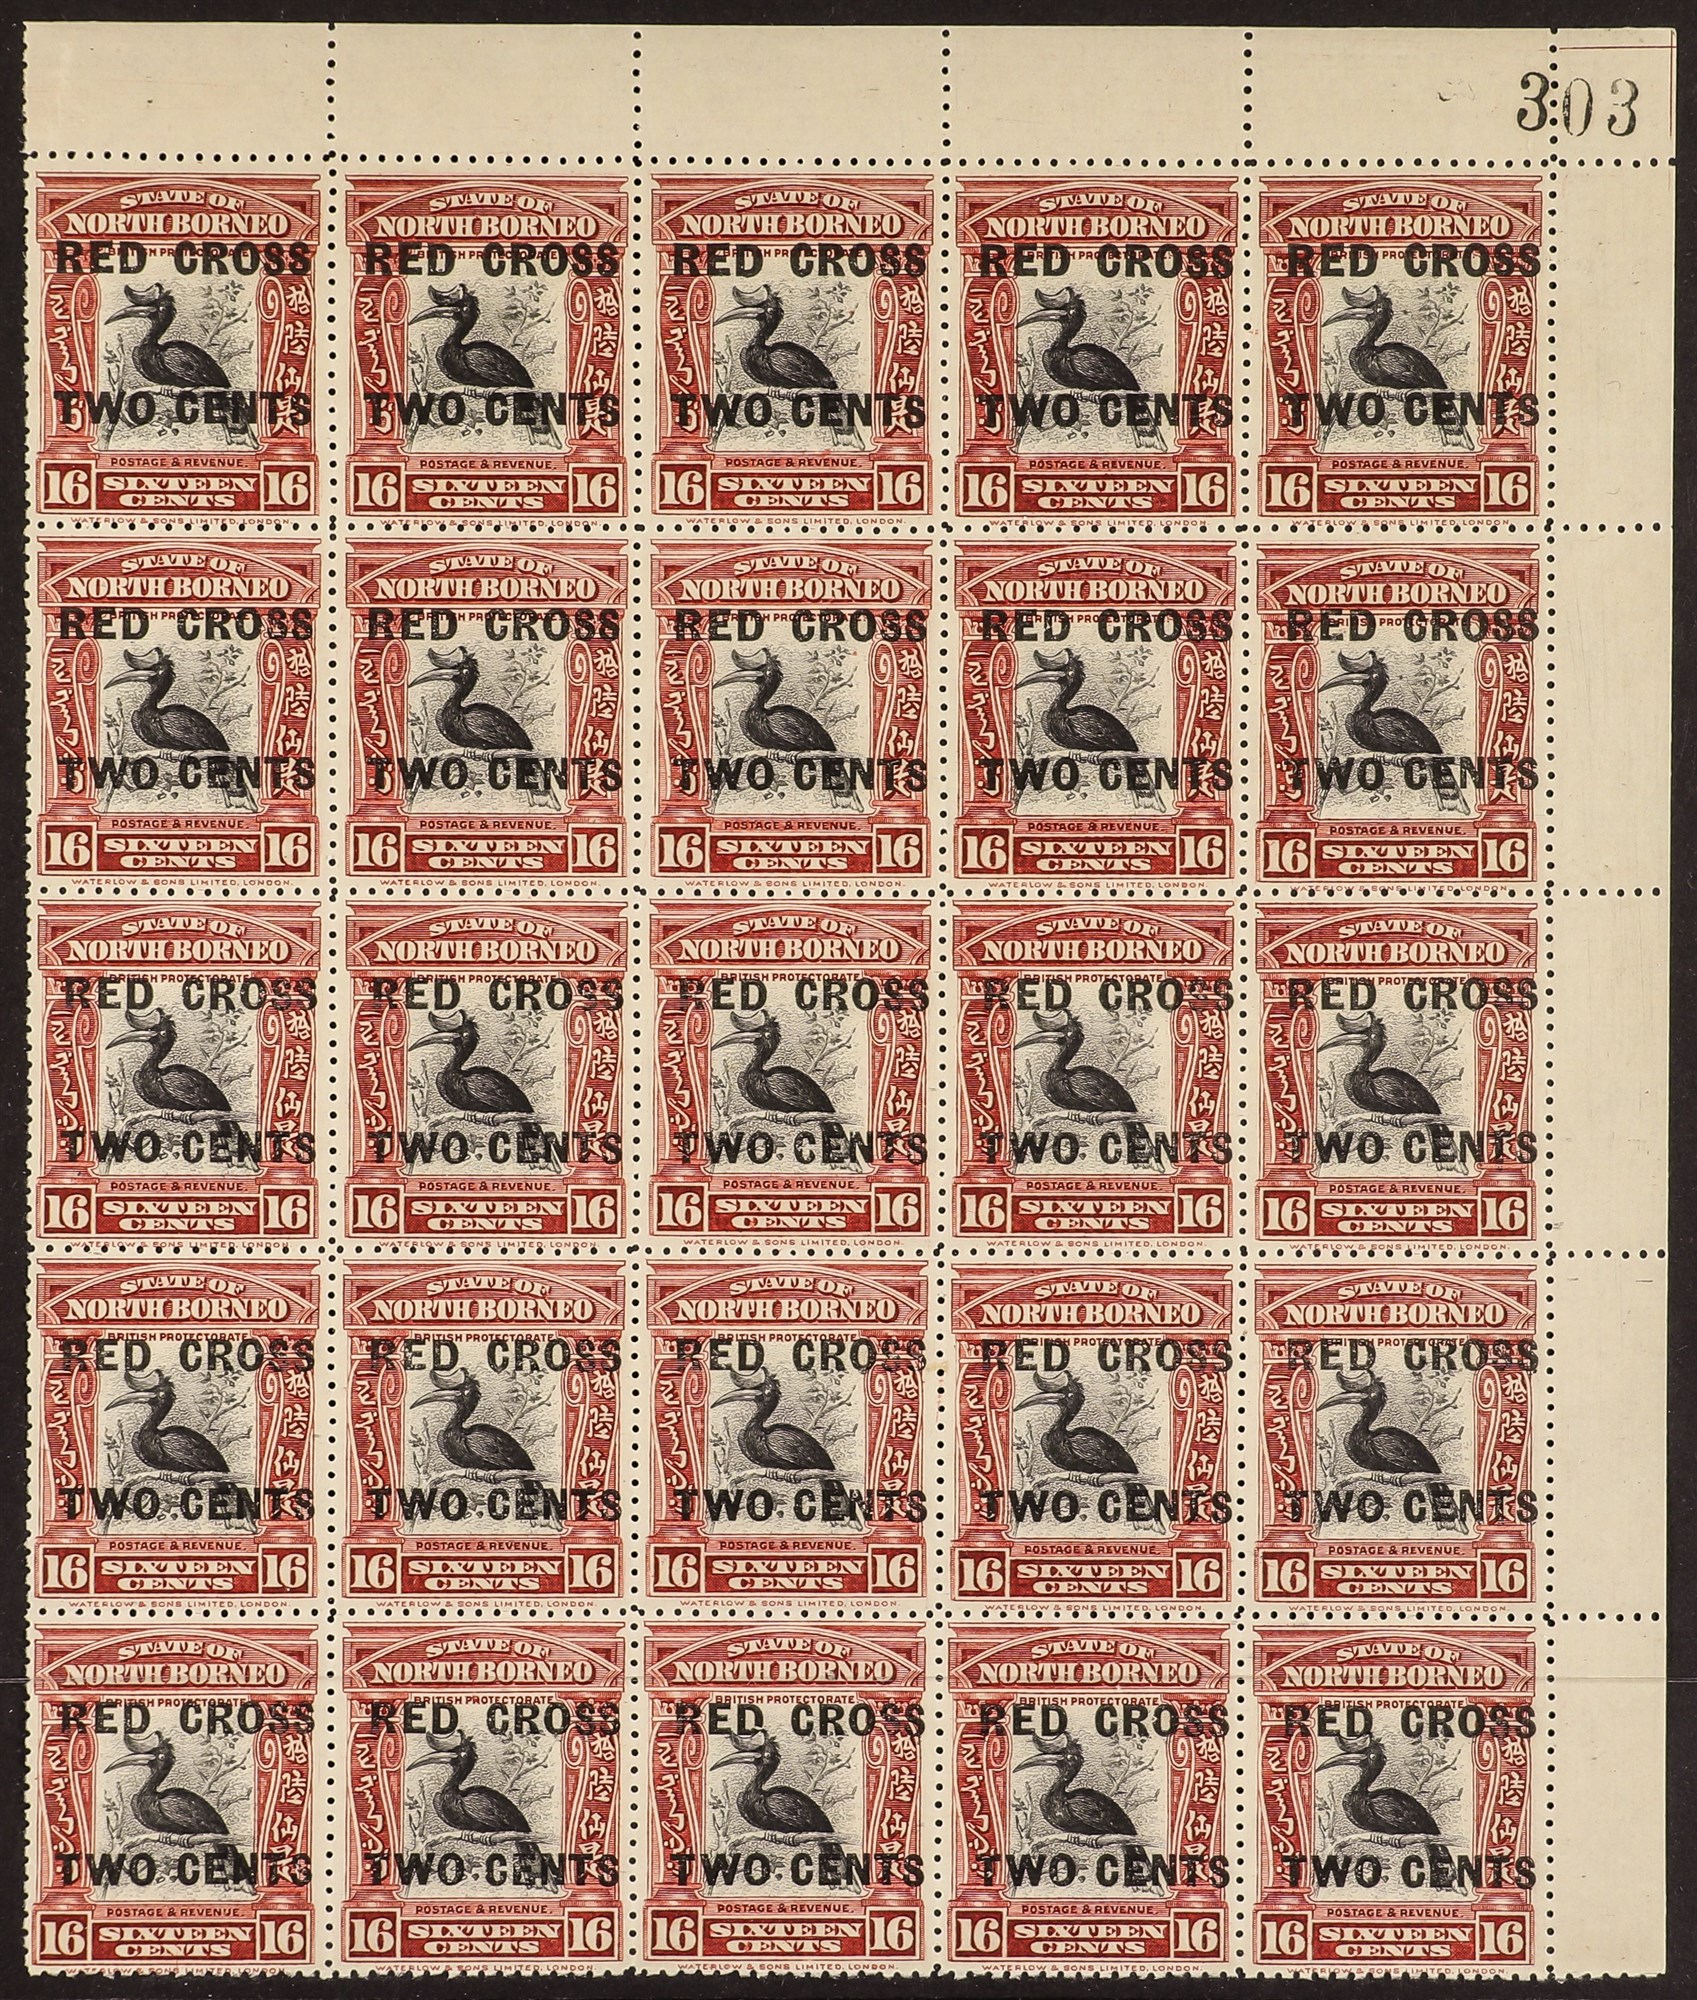 NORTH BORNEO 1918 (Aug) "RED CROSS / TWO CENTS" on 16c, SG 225, block 25 from the top-right